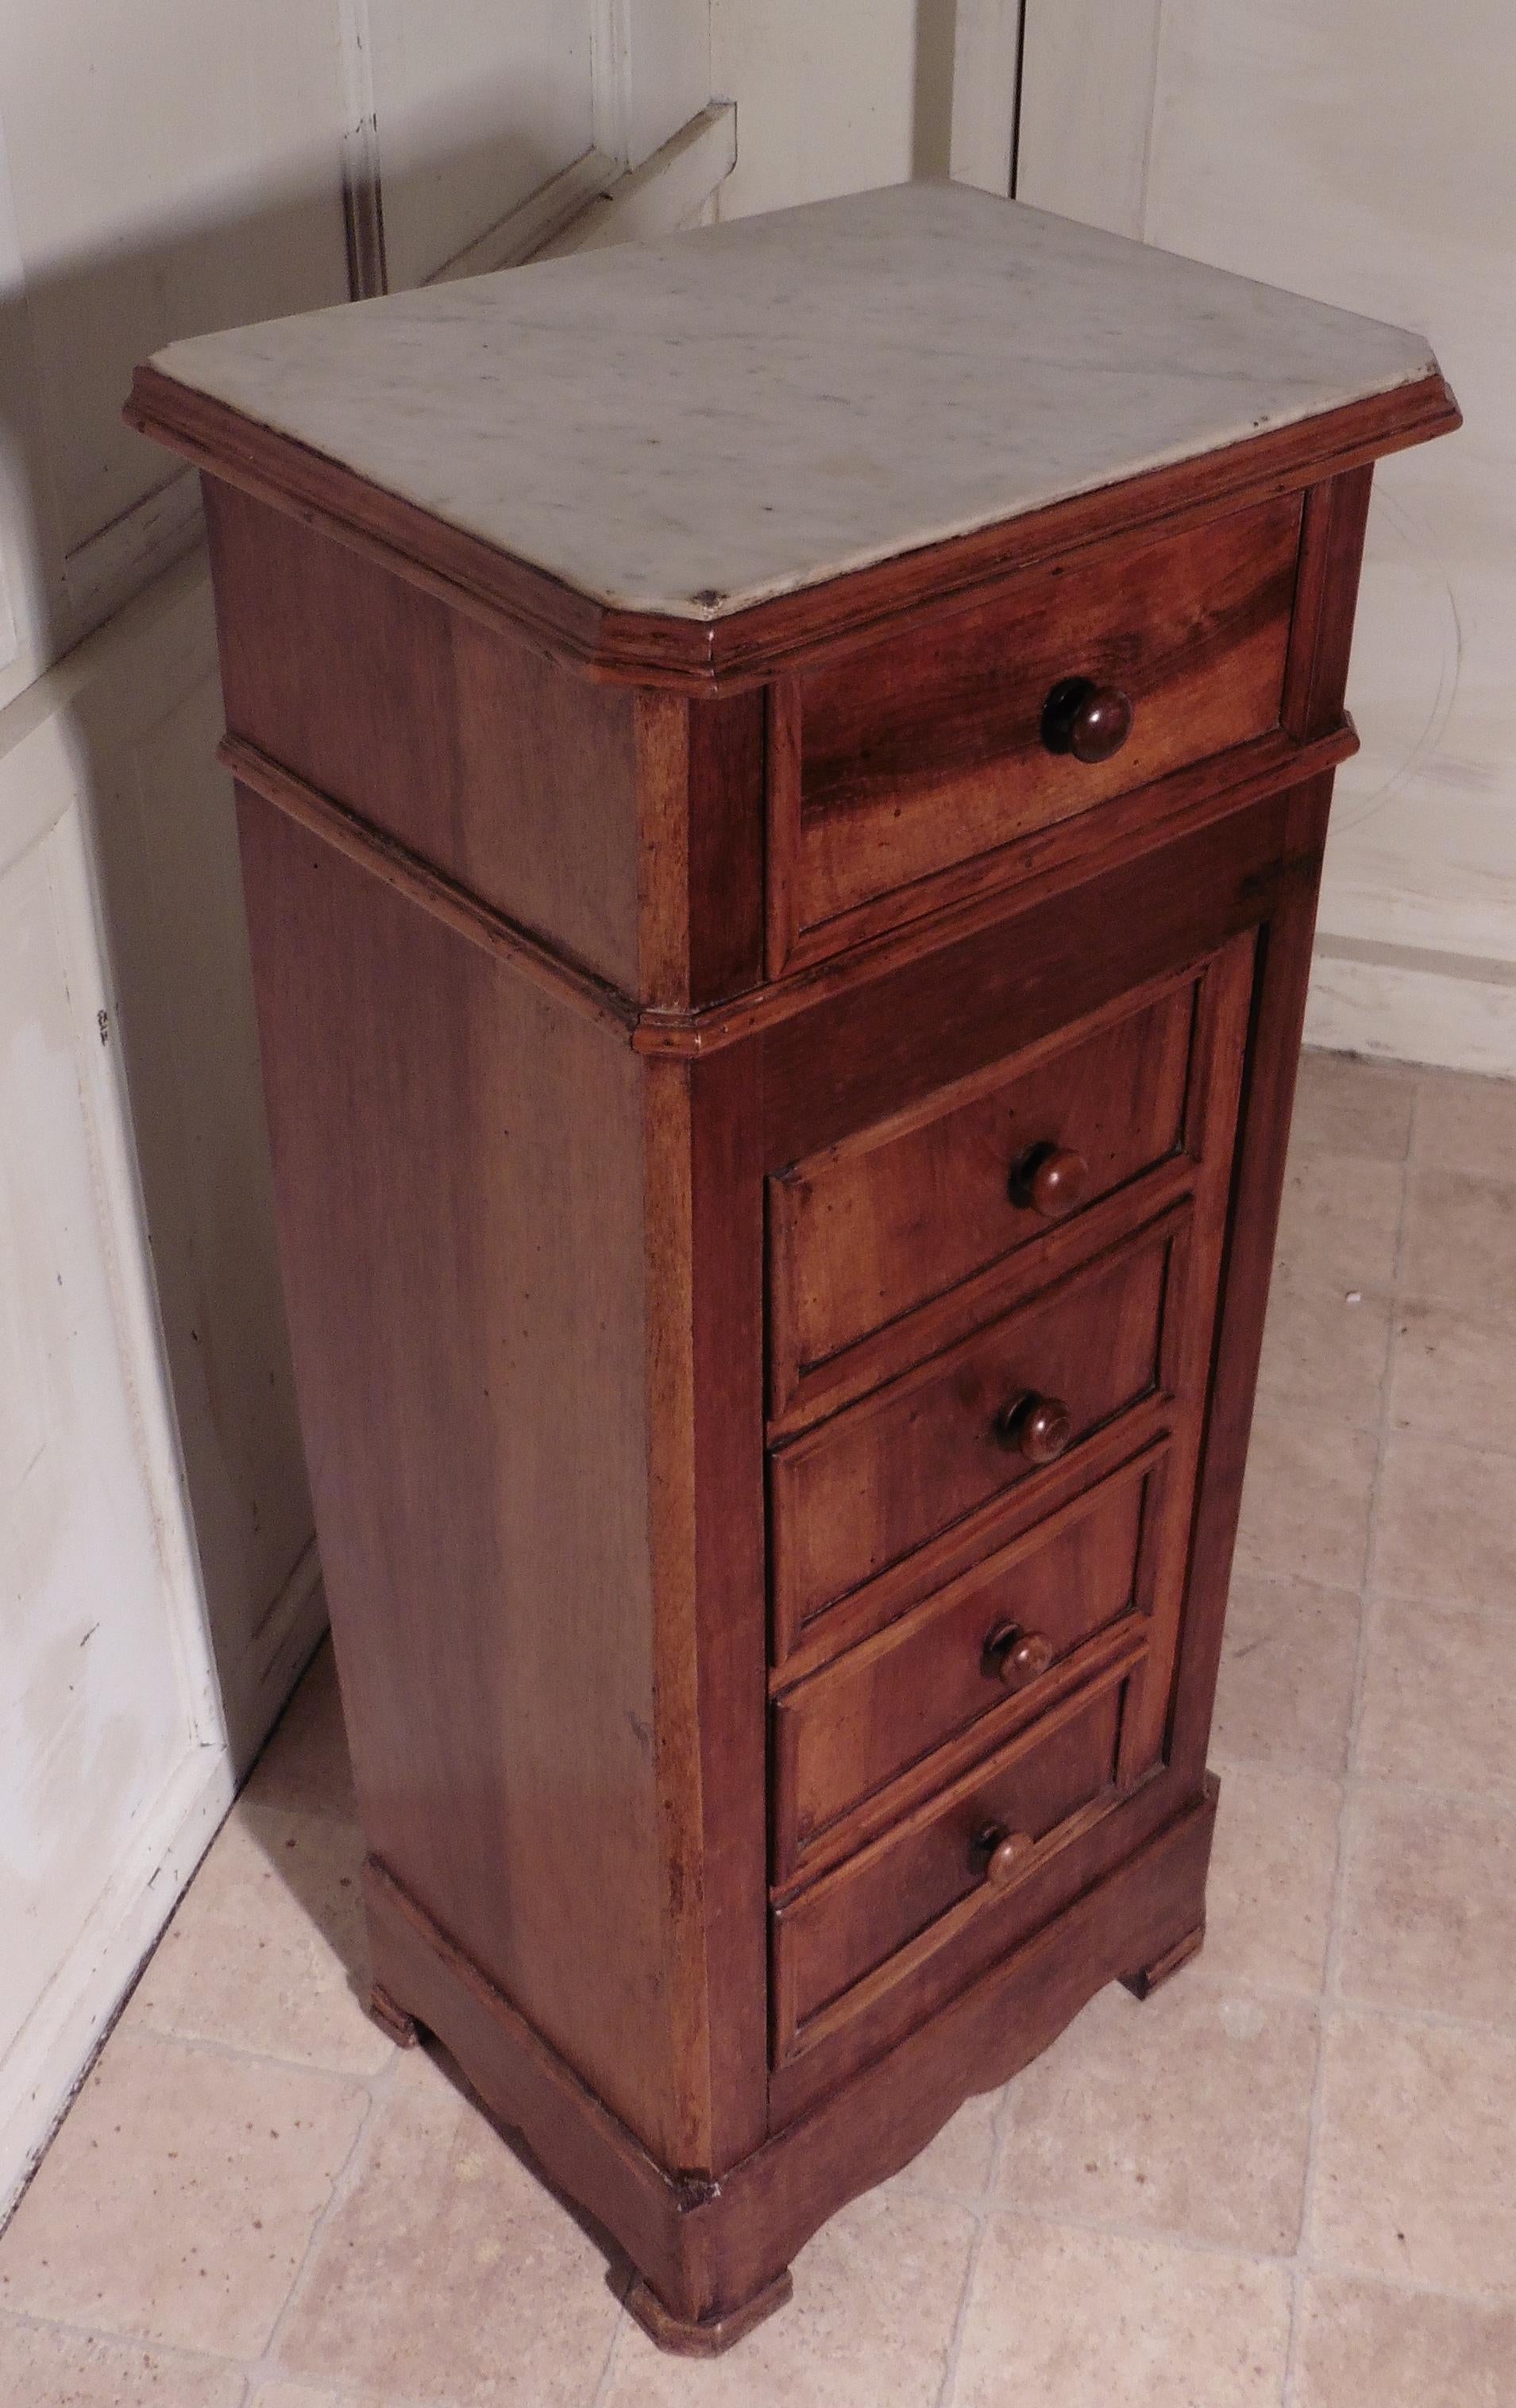 French Provincial French Figured Walnut Bedside Chest of Drawers or Night Table   This piece is ma